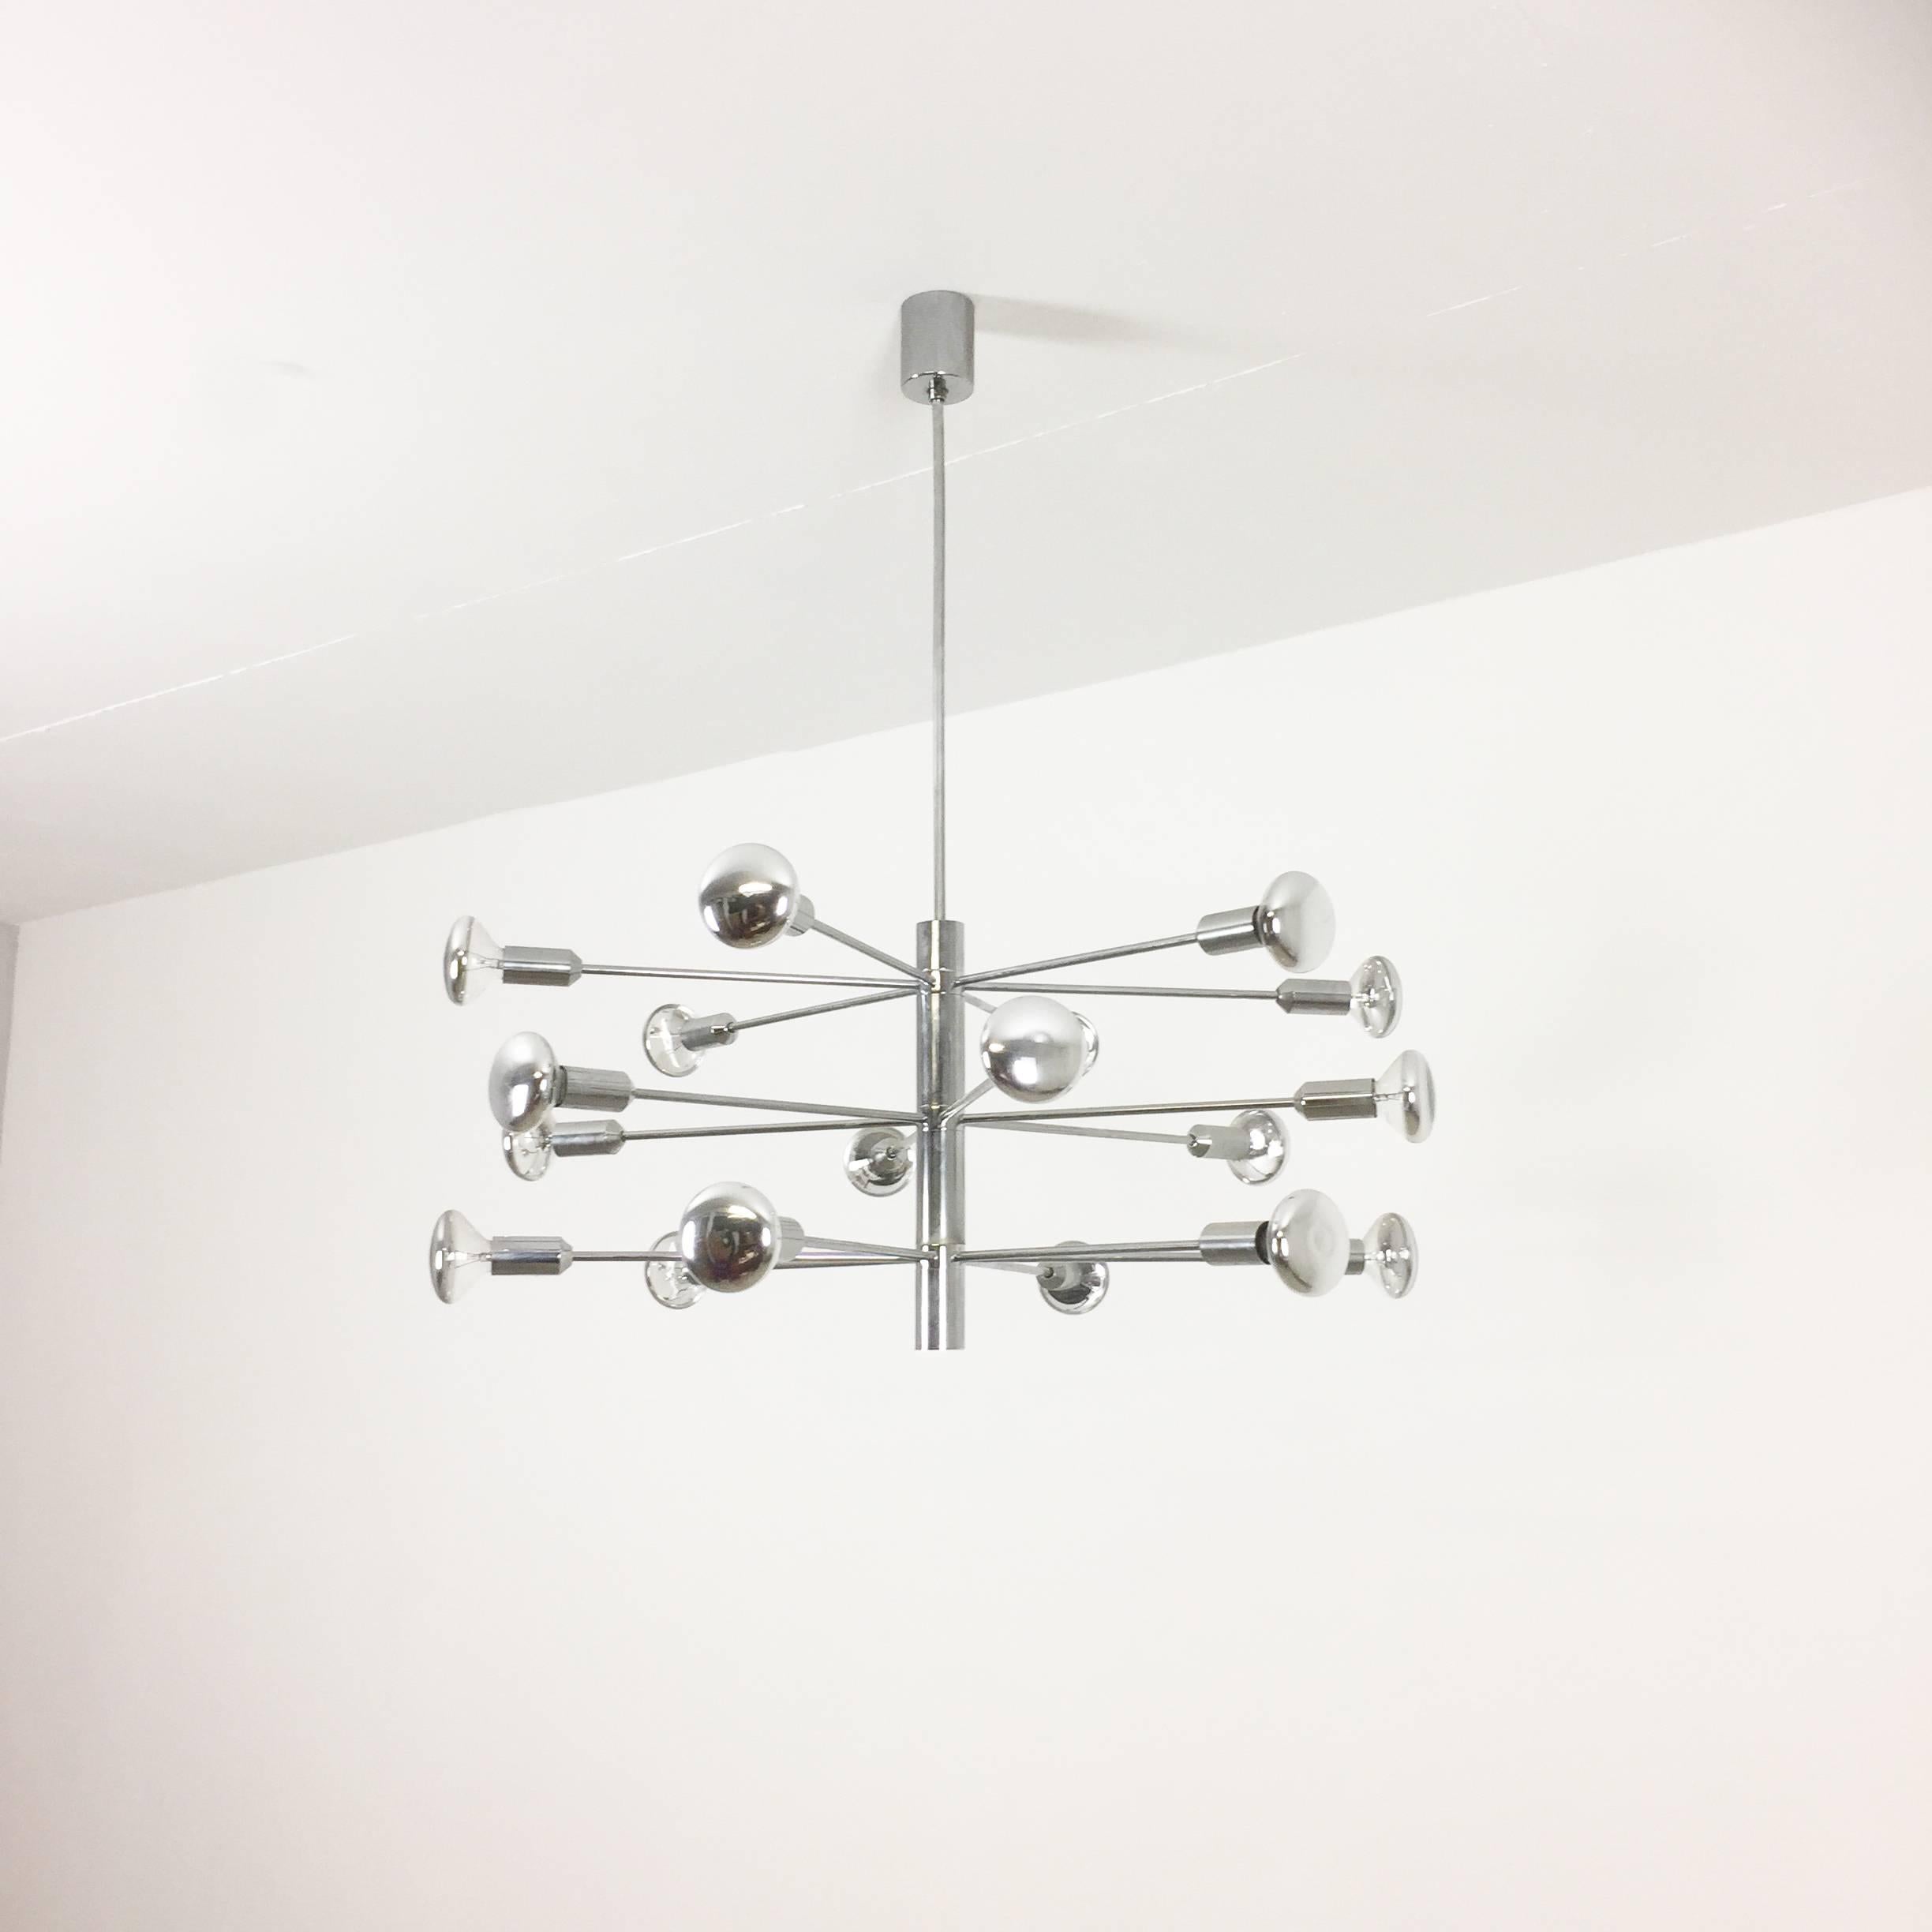 Article:

Sputnik hanging light


Producer:

Cosack Lights, Germany


Origin:

Germany



Age:

1960s



This 1960s hanging light was made by Cosack Lights in Germany. The light is made of solid metal in chrome tone finish, its